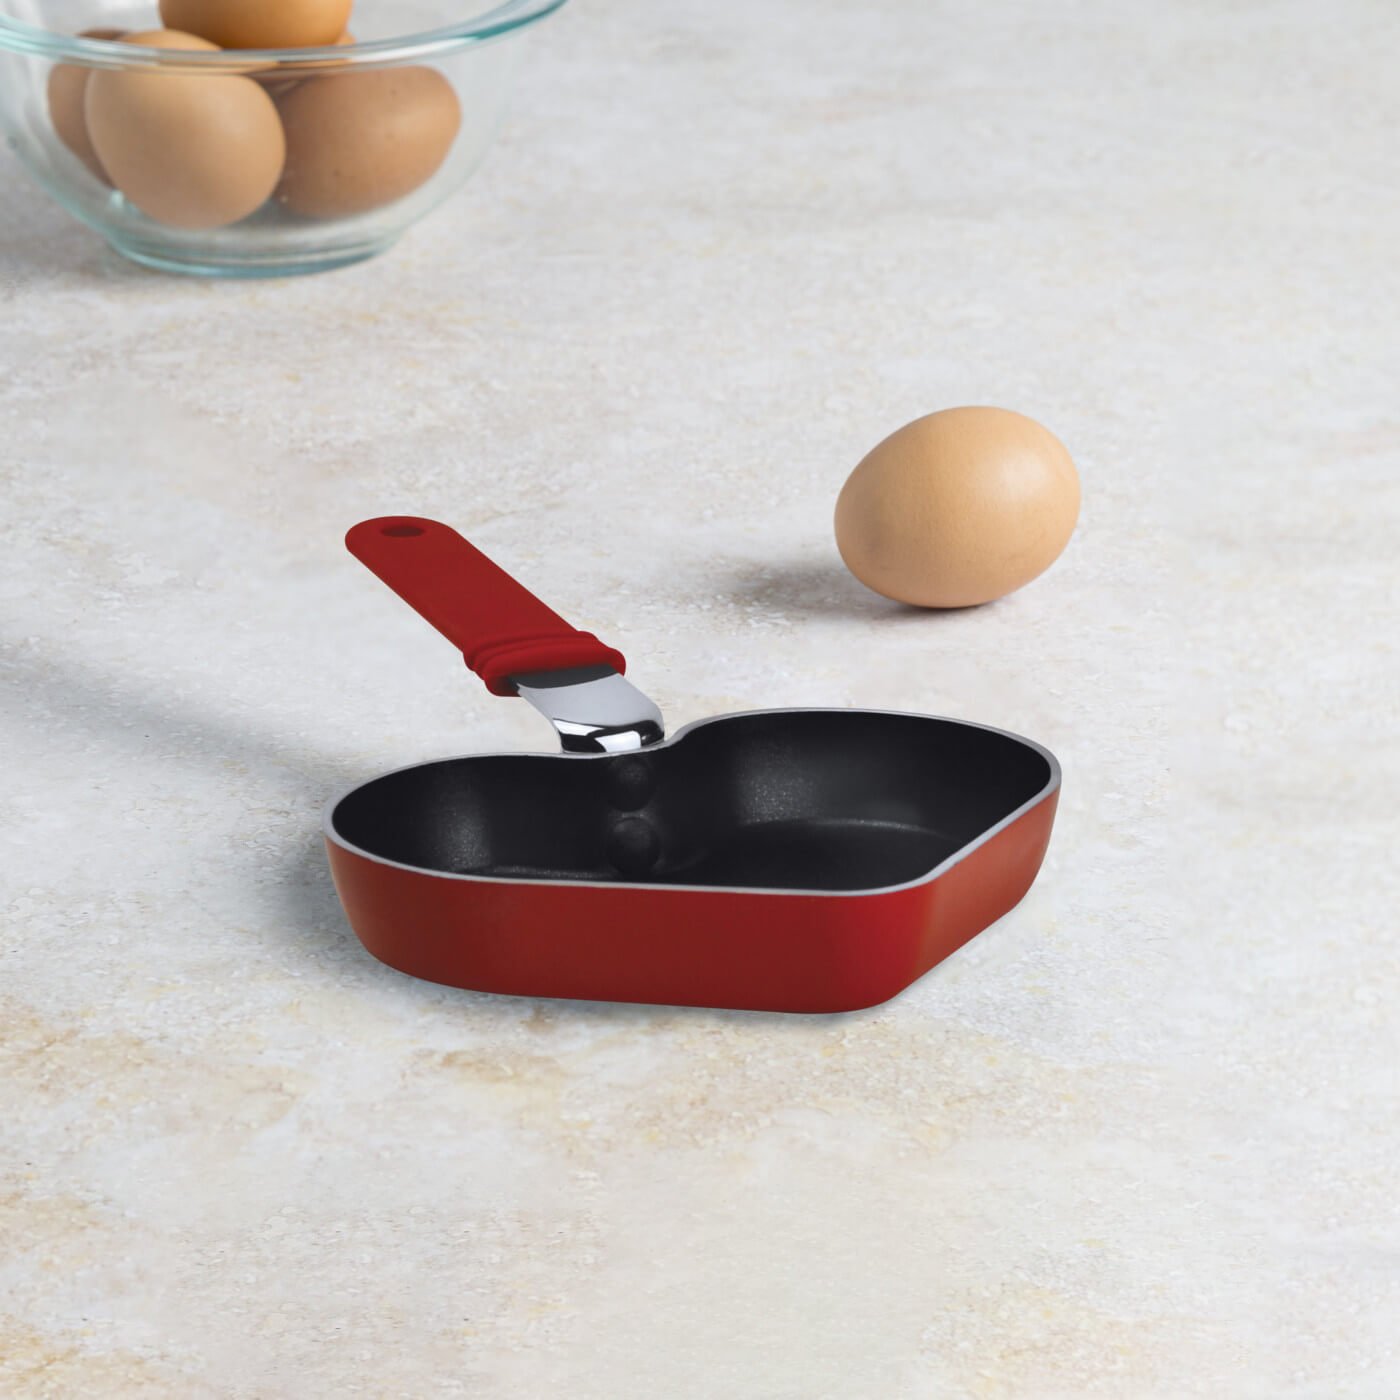 Ecolution Kitchen Extras 6-Inch Heart Shaped Pan, Mini, Red